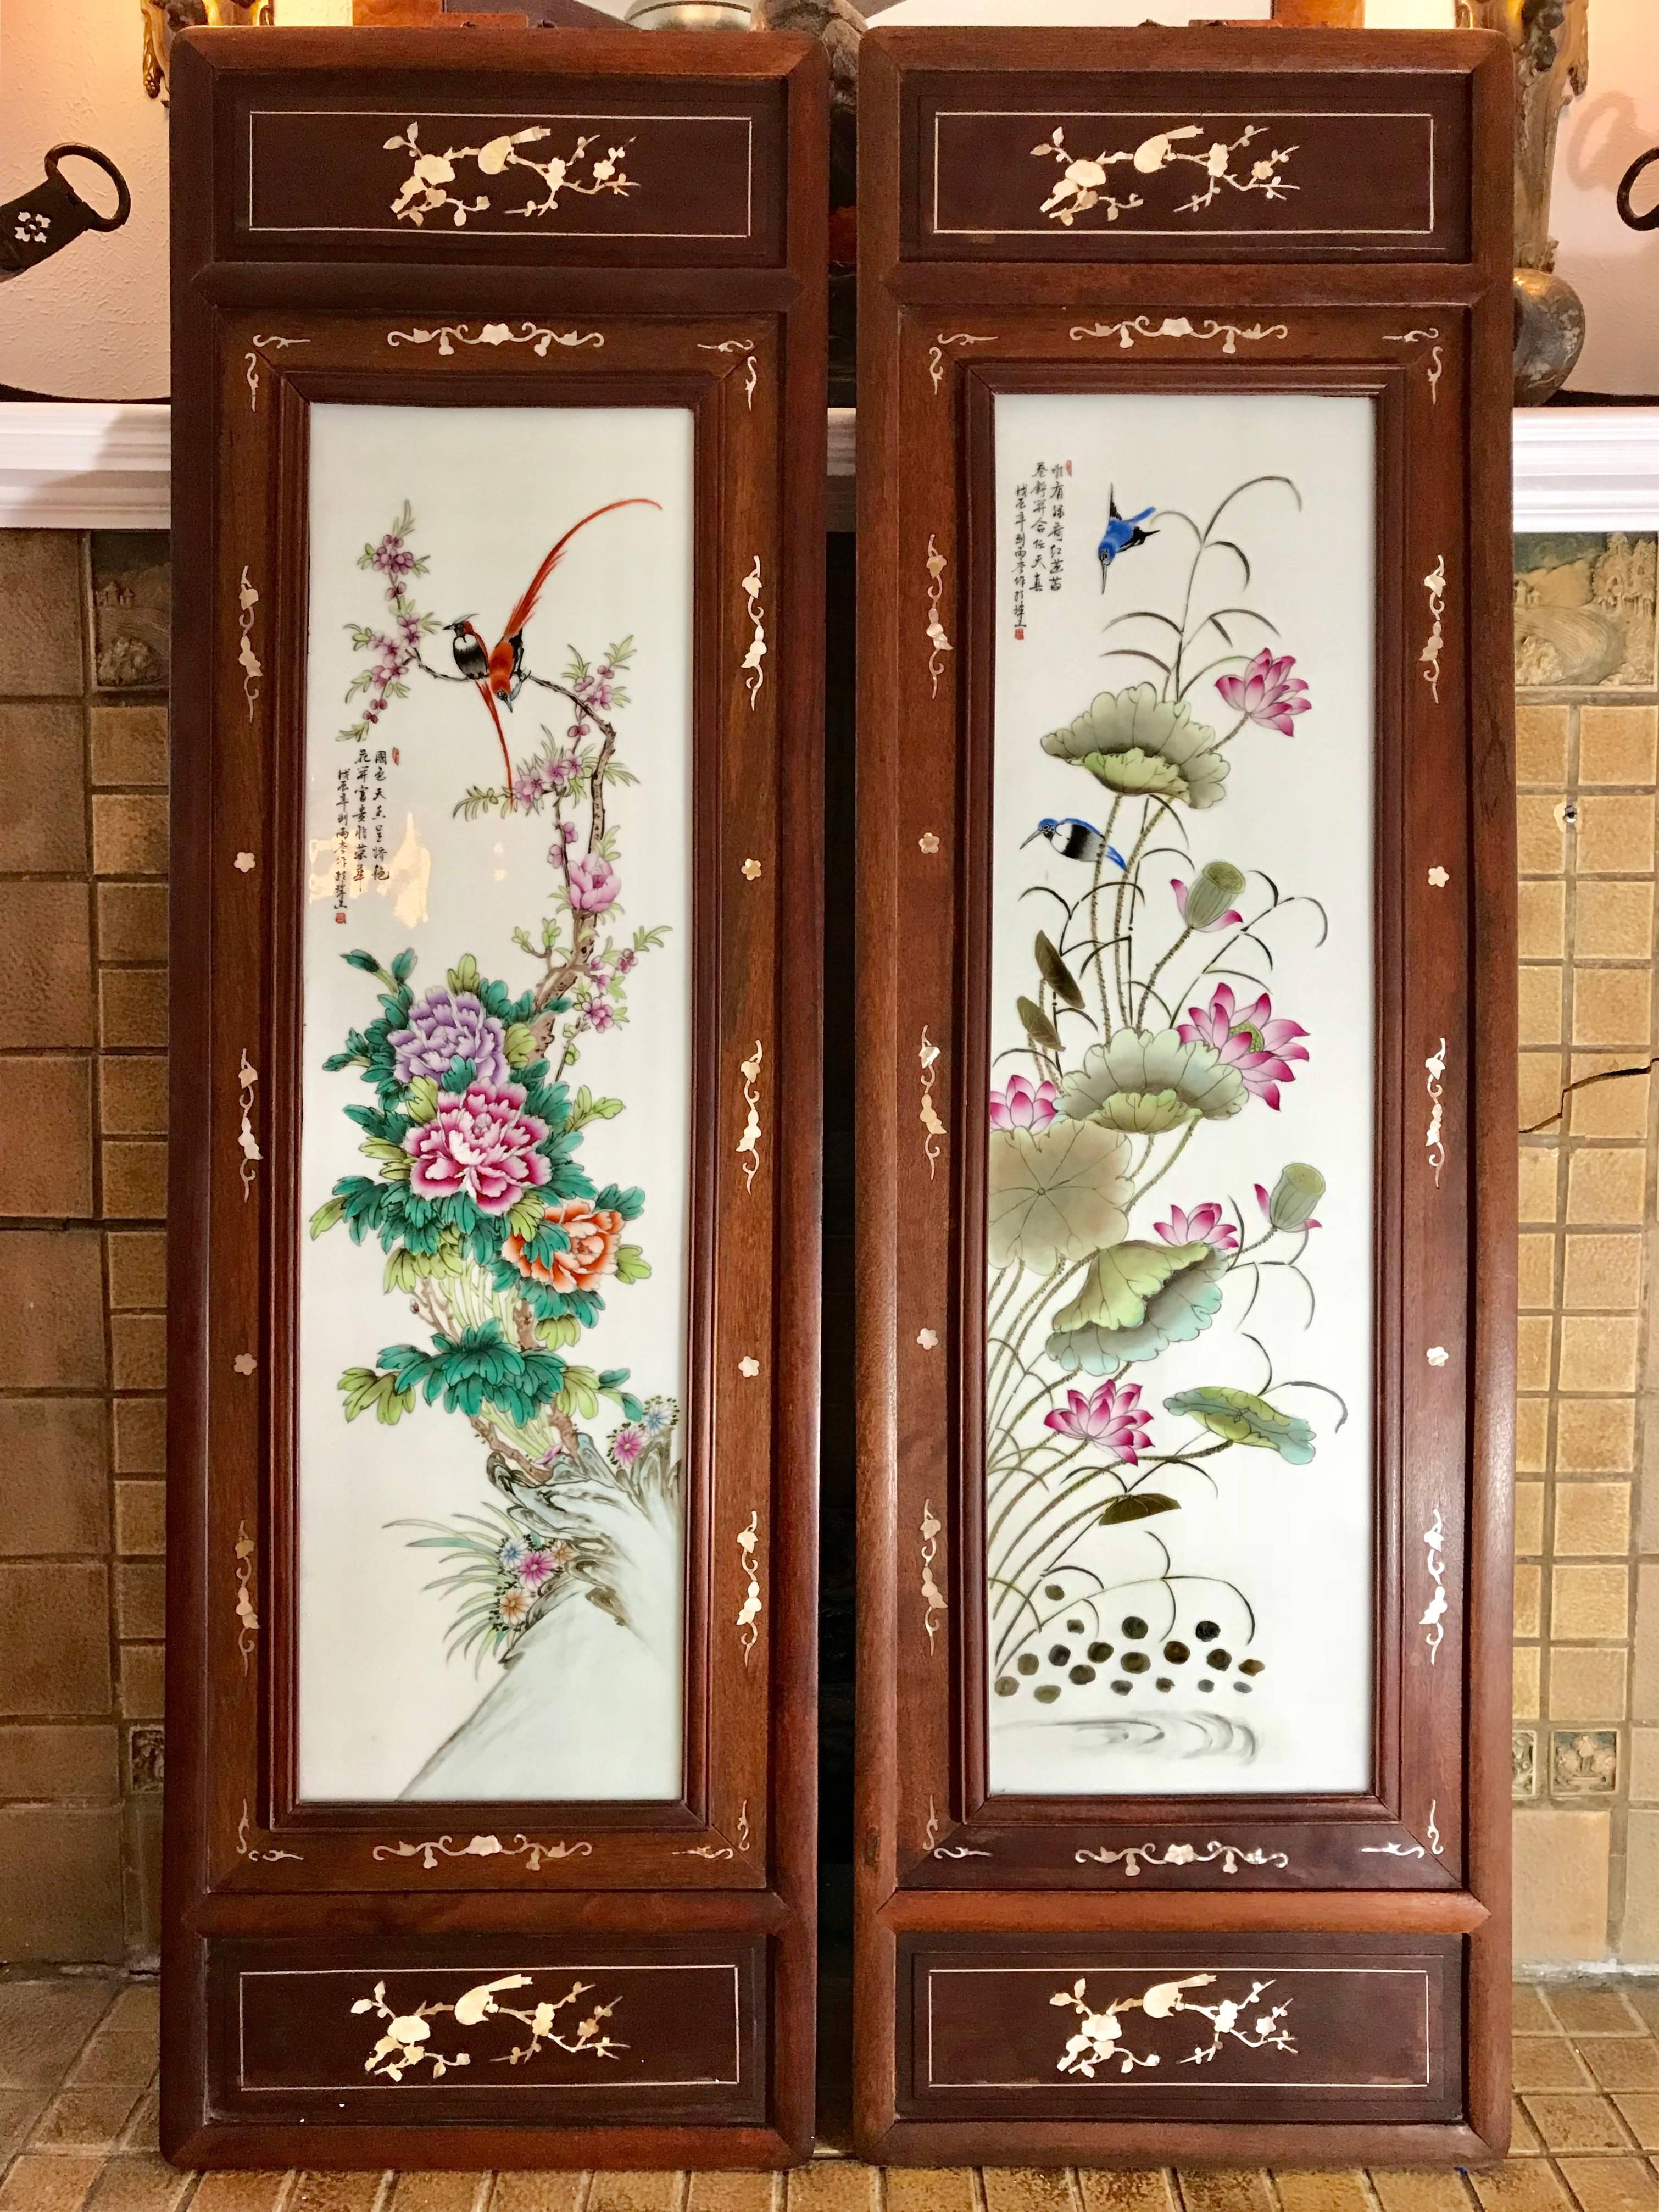 Pair of Chinese republic Liu Yucen signed porcelain painted plaques, 1928. Houses in furniture chair grade rosewood with inlaid mother-of-pearl designs. Post Qing Dynasty Asian ceramic floral botanical lotus and lily pad painting with beautiful red